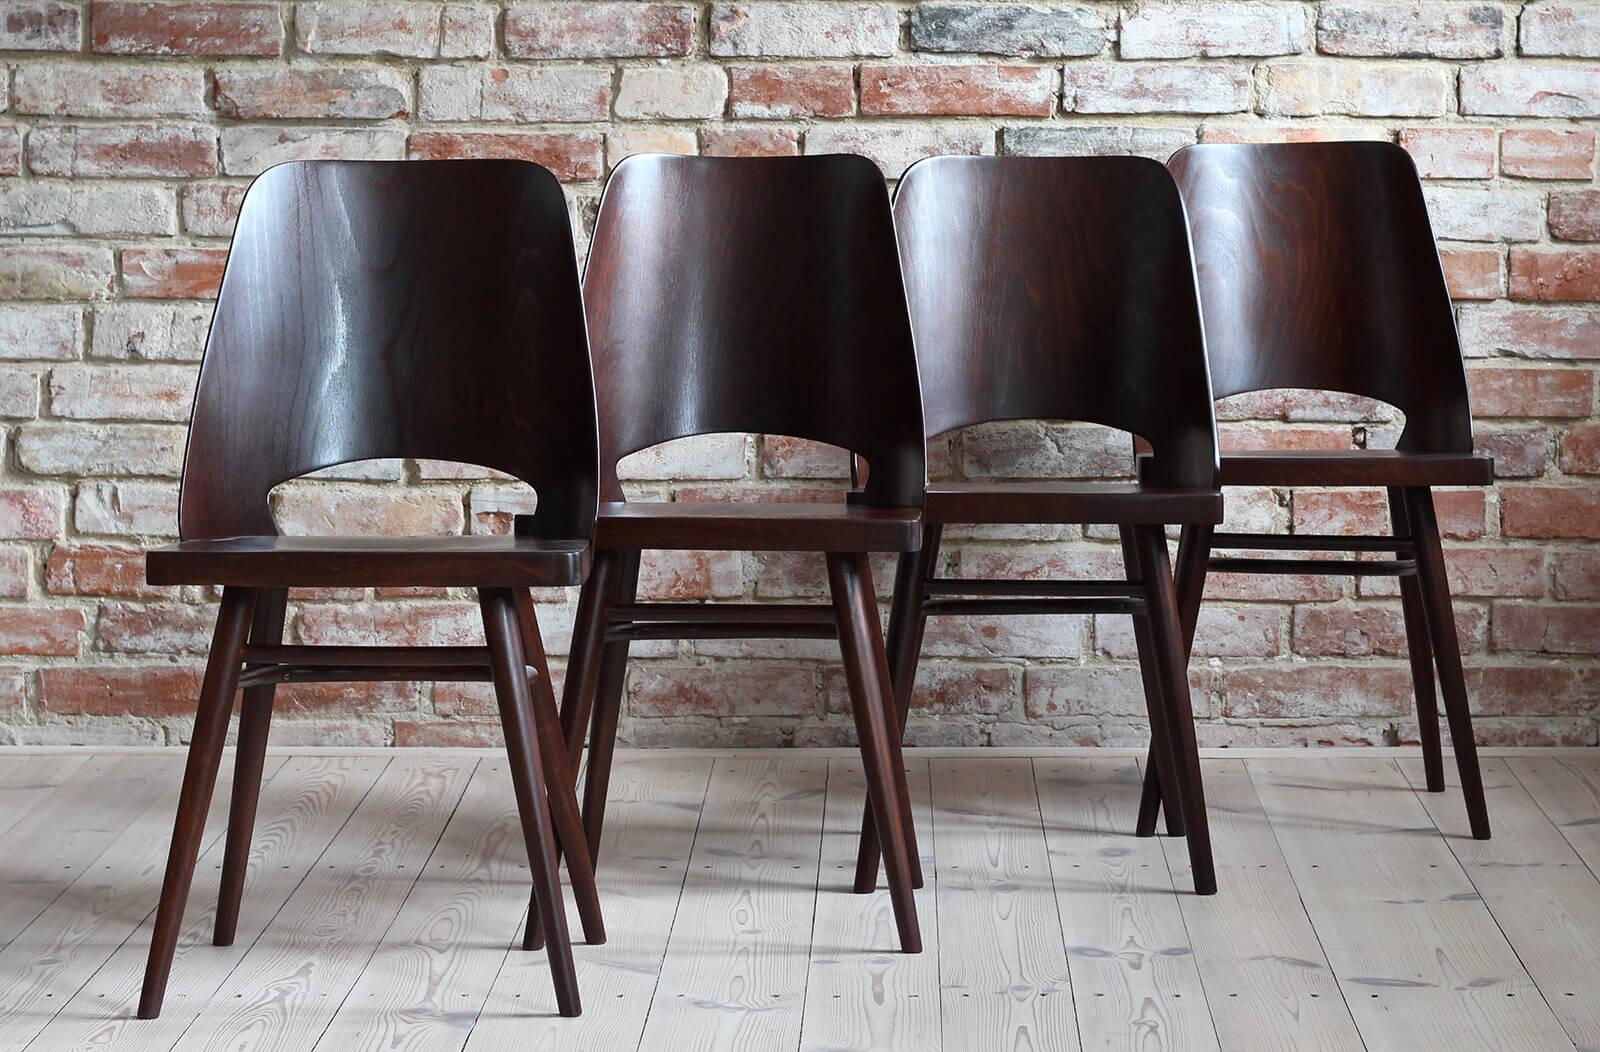 Set of 4 chairs designed by Radomir Hofman for TON, Model 514. The chairs are after complete renovation, have been cleaned, polished and refinished with high-quality satine lacquer that protects the wood. They are veneered with beechwood. Beautiful